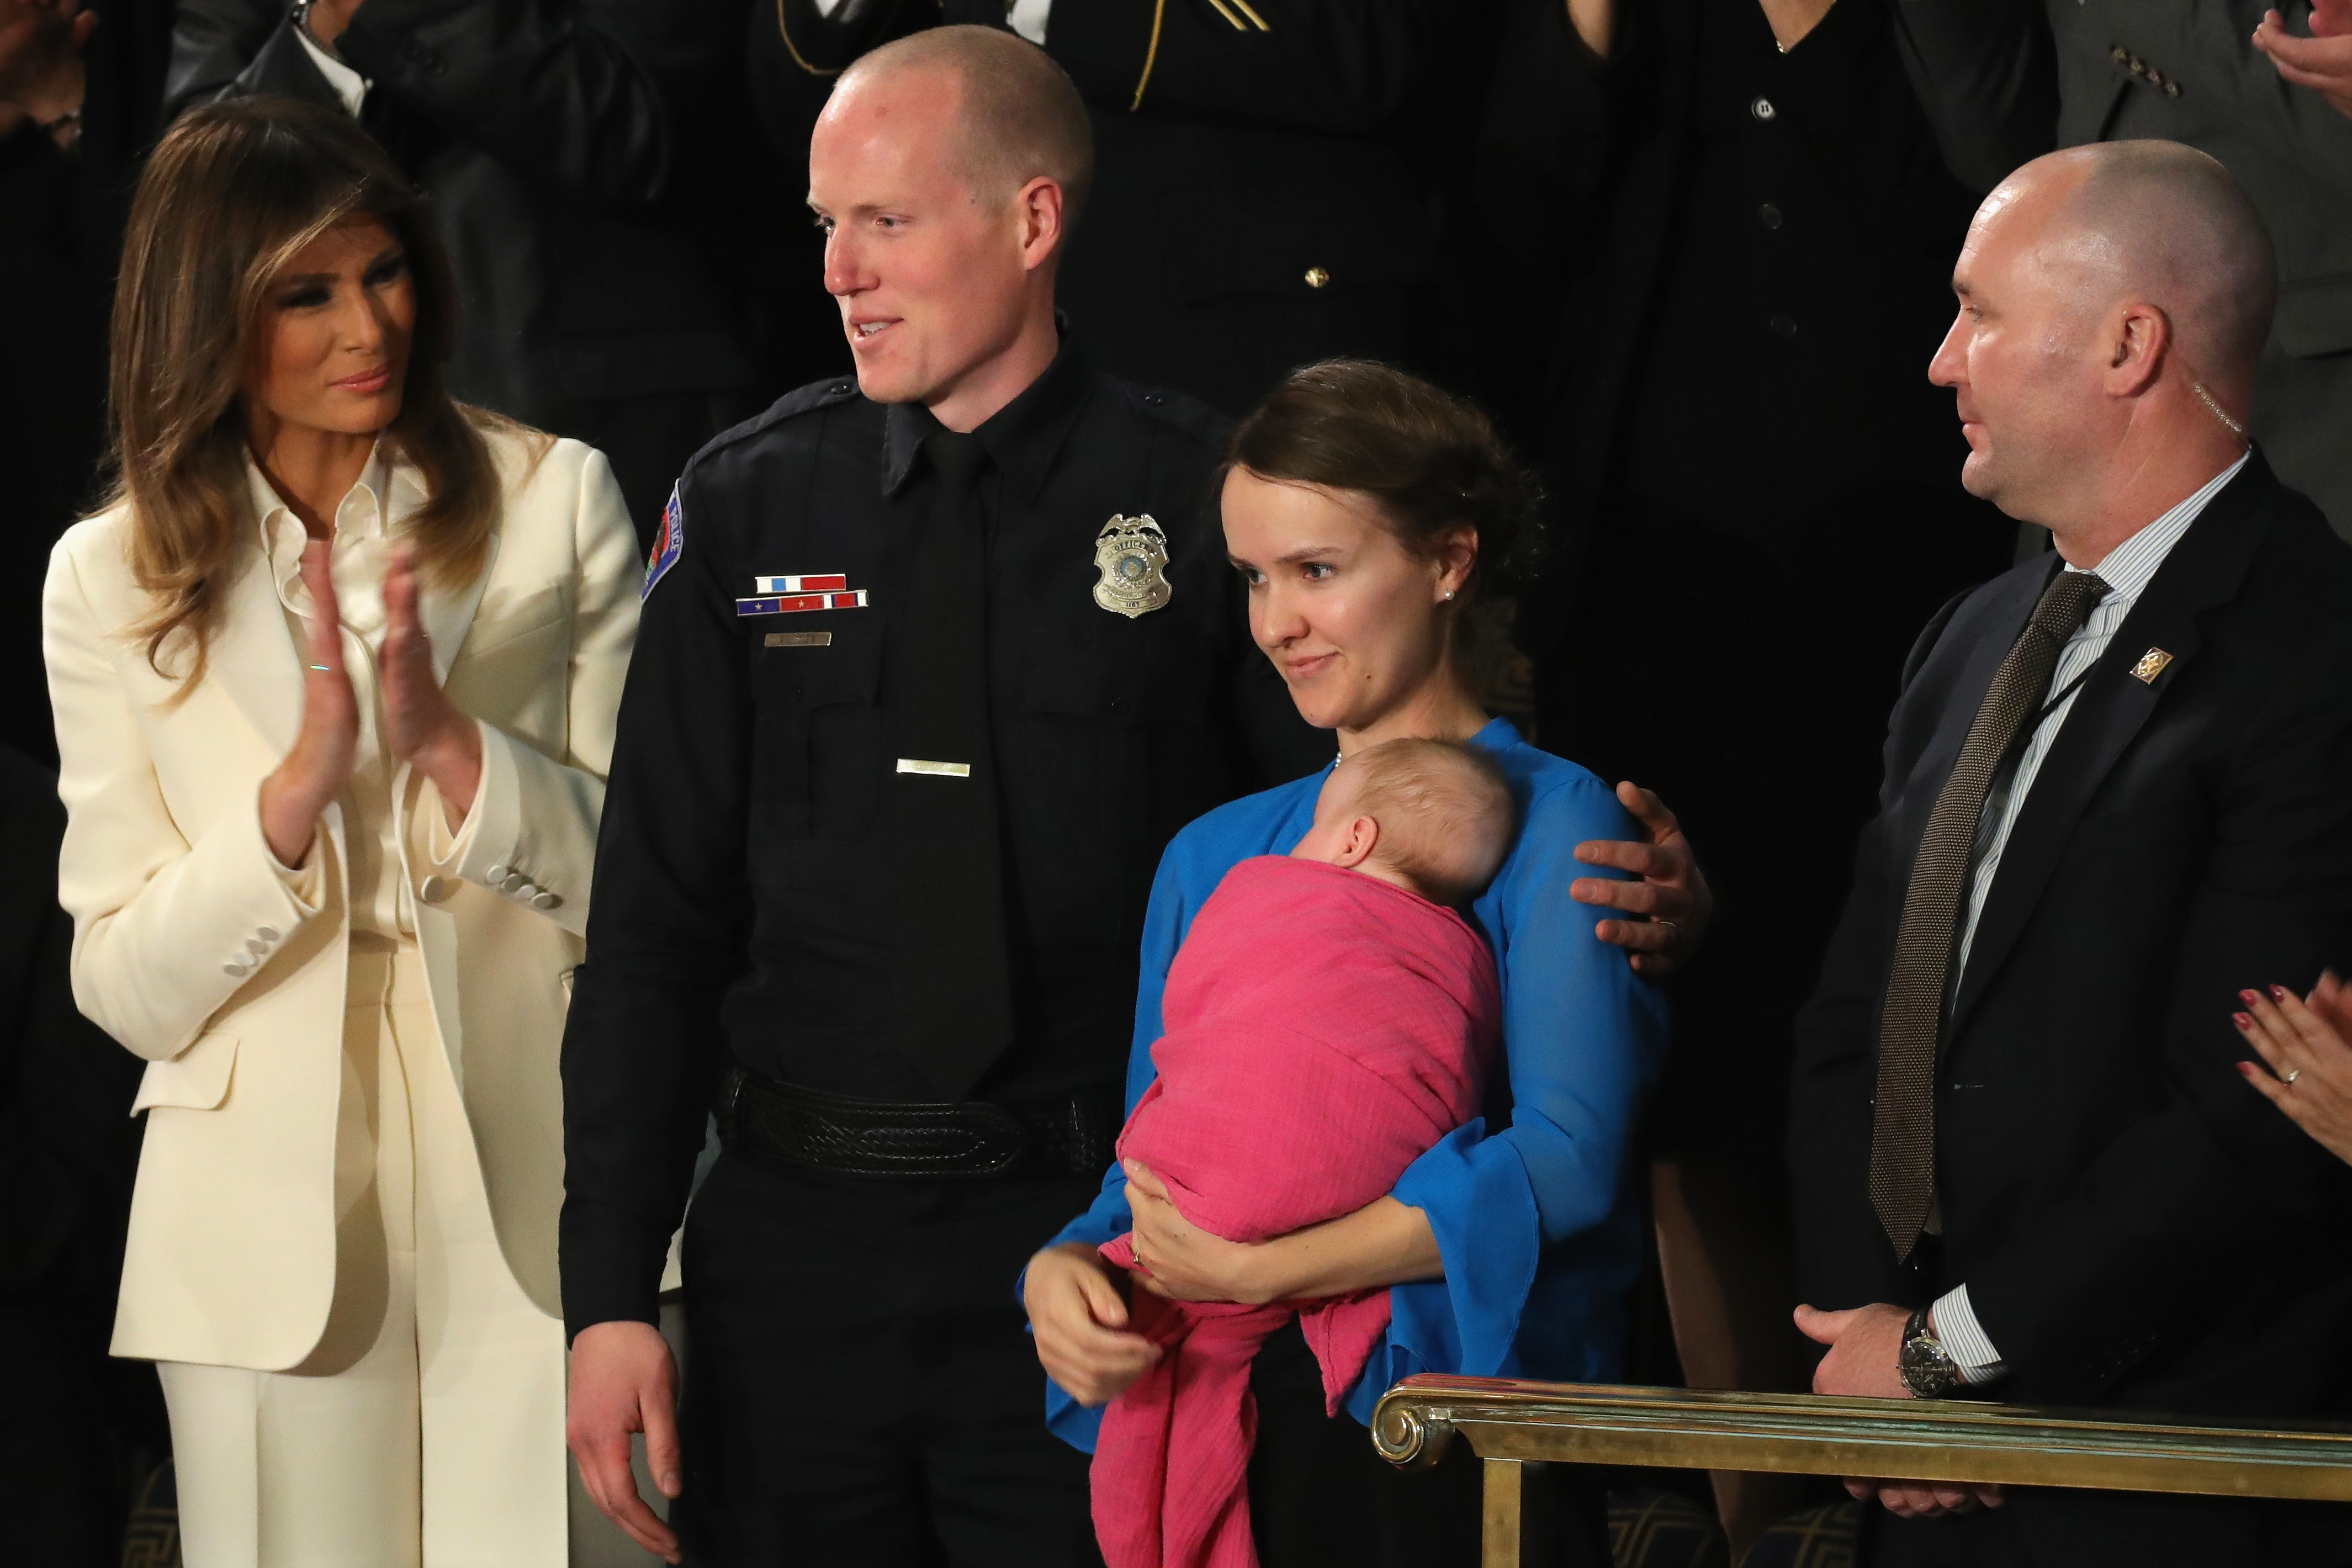 First lady Melania Trump claps for Police officer Ryan Holets and his wife during the State of the Union address in the chamber of the U.S. House of Representatives January 30, 2018 in Washington, DC. (Chip Somodevilla—Getty Images)